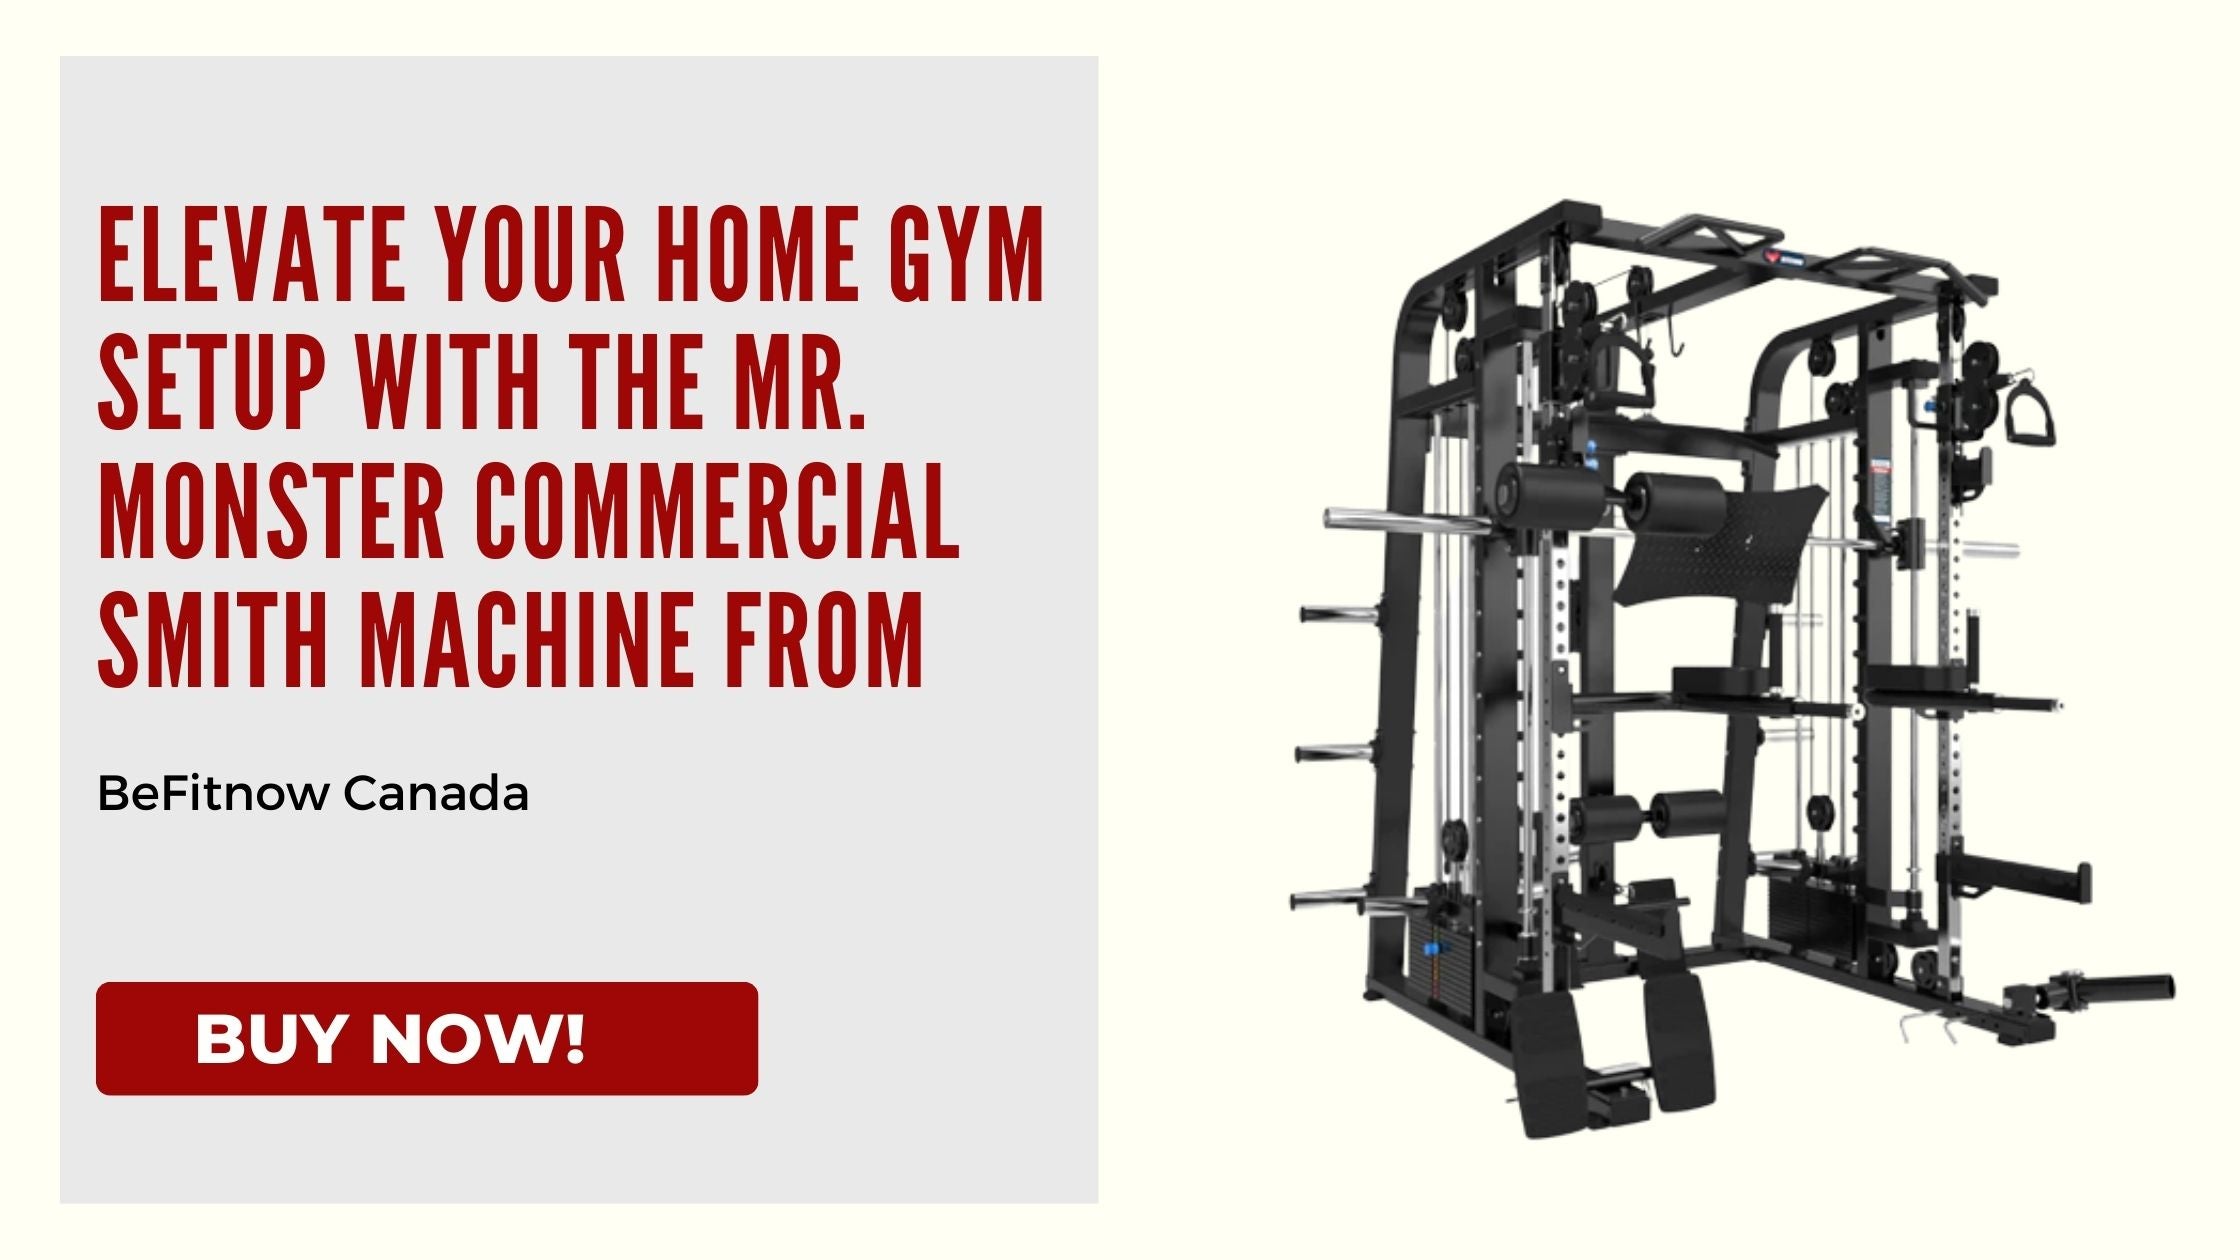 Elevate Your Home Gym Setup with the Mr. Monster Commercial Smith Machine from BeFitnow Canada